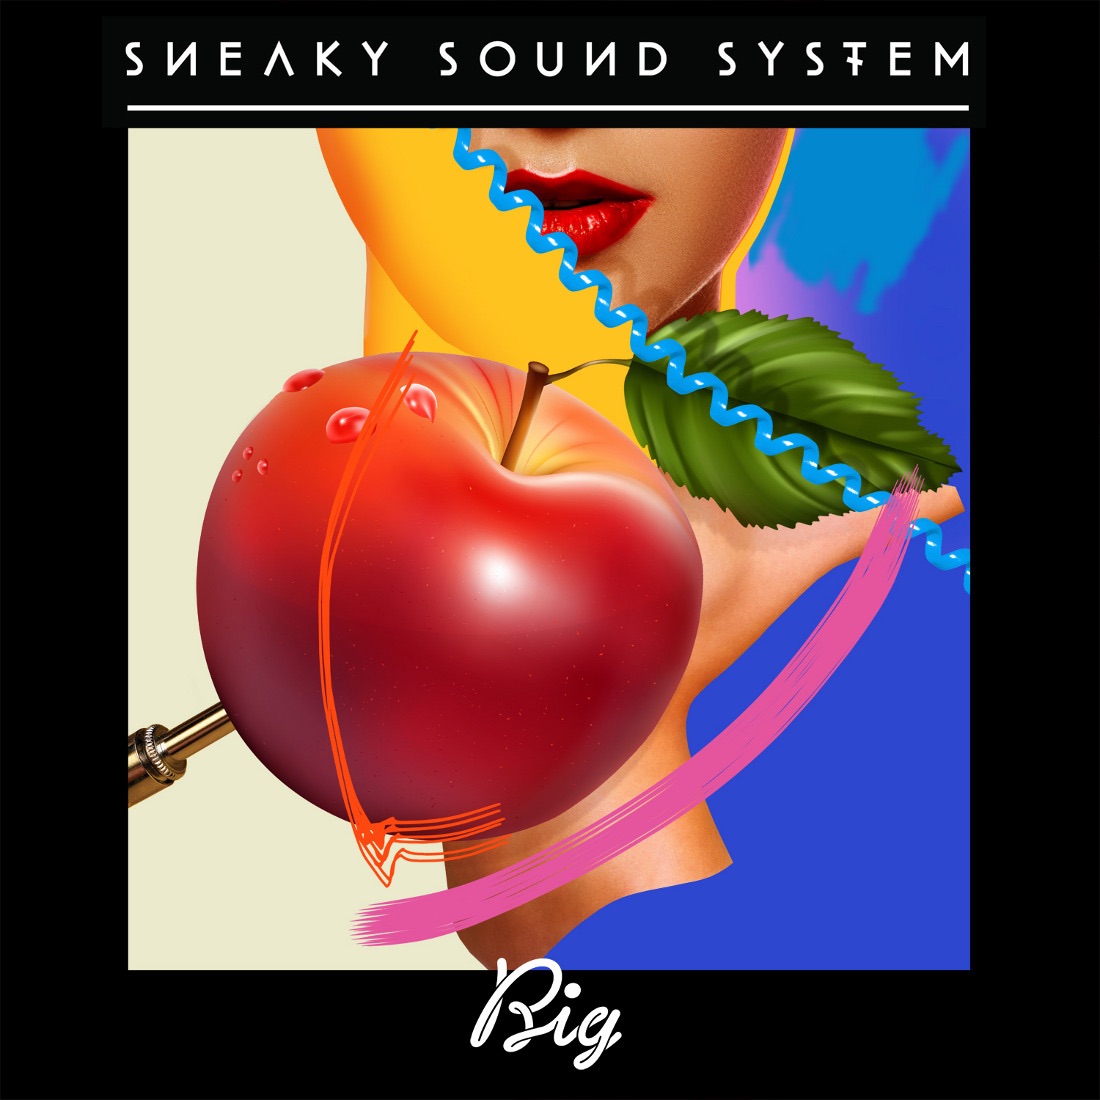 Sneaky Sound System — Big cover artwork